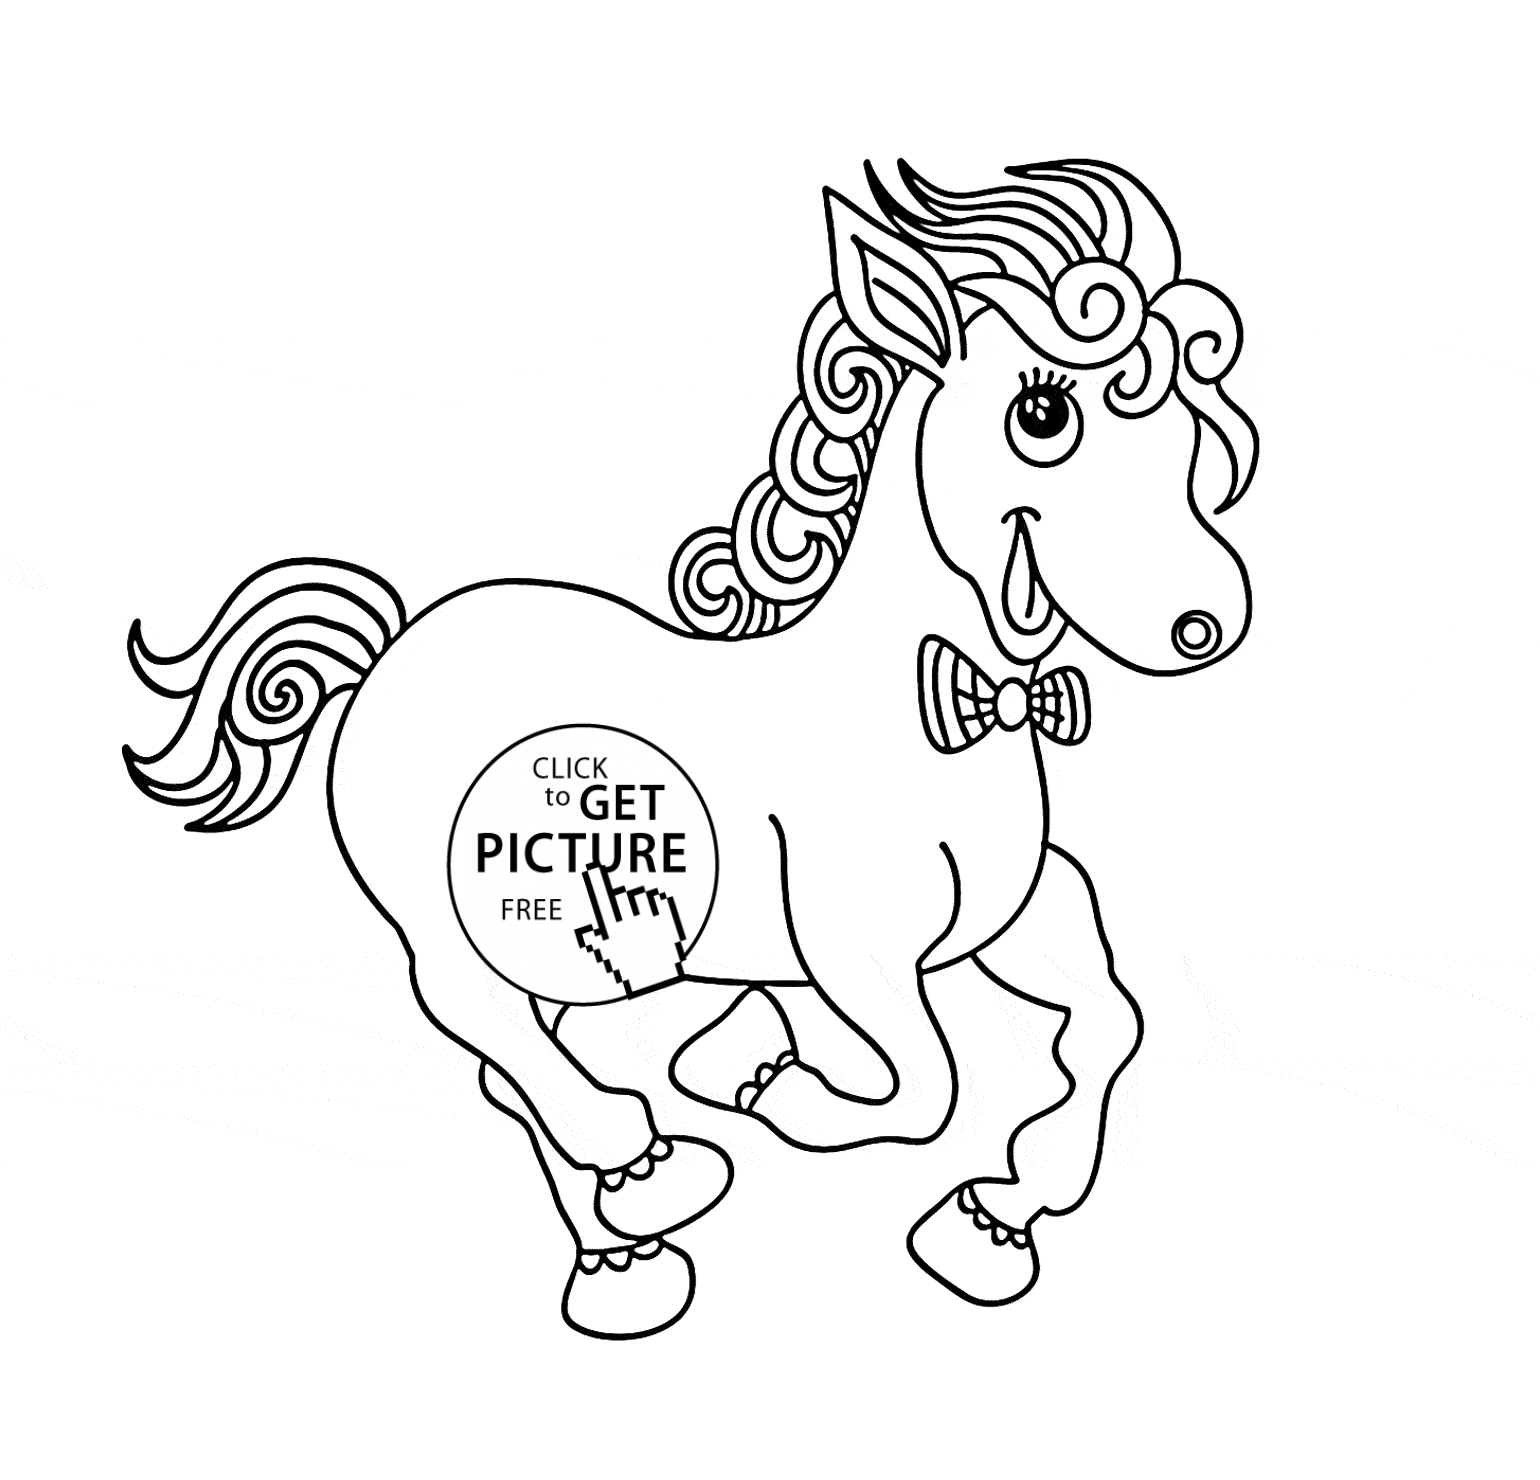 Funny Cute Pony coloring page for kids, for girls coloring pages ...